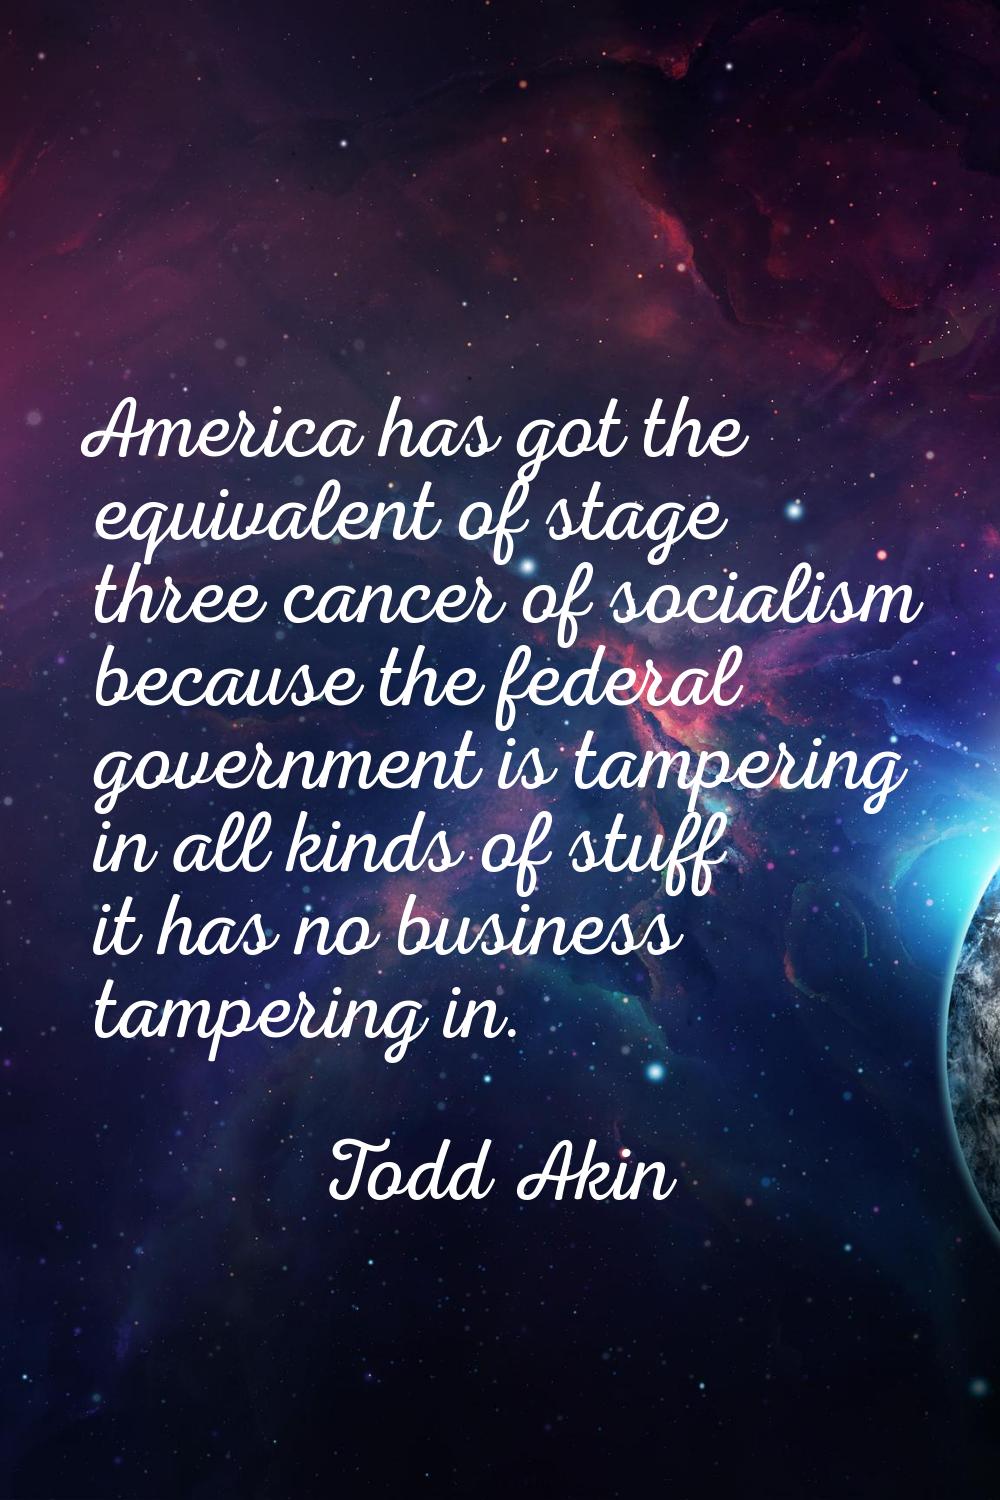 America has got the equivalent of stage three cancer of socialism because the federal government is